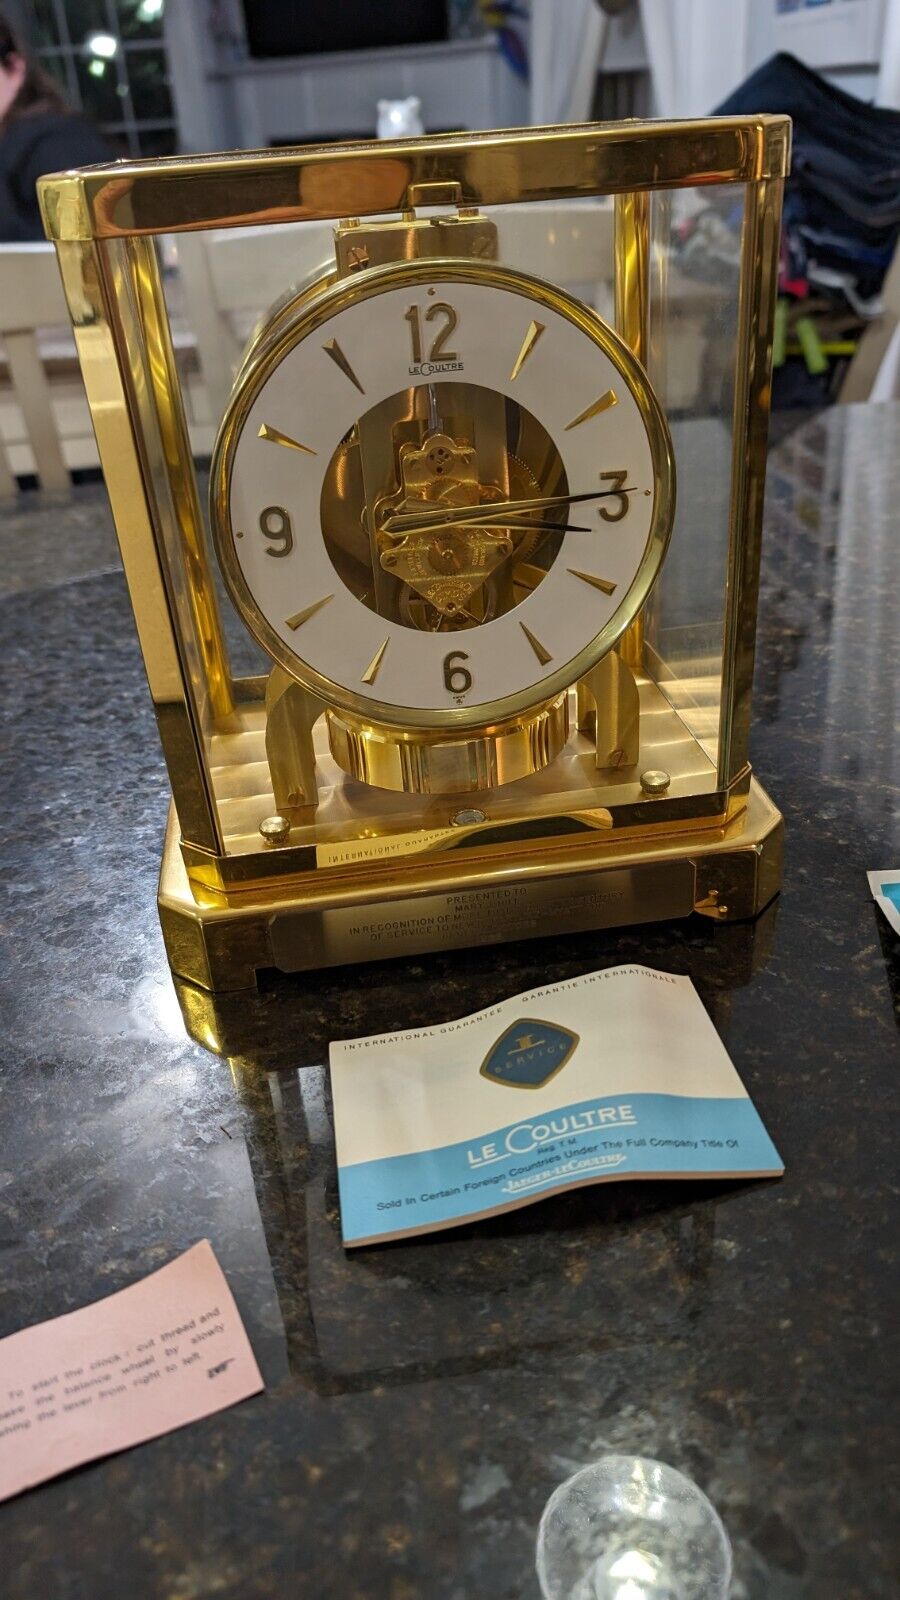 VINTAGE 60's JAEGER LE COULTRE ATMOS PERPETUAL CLOCK WITH ORIGINAL PACKAGING 